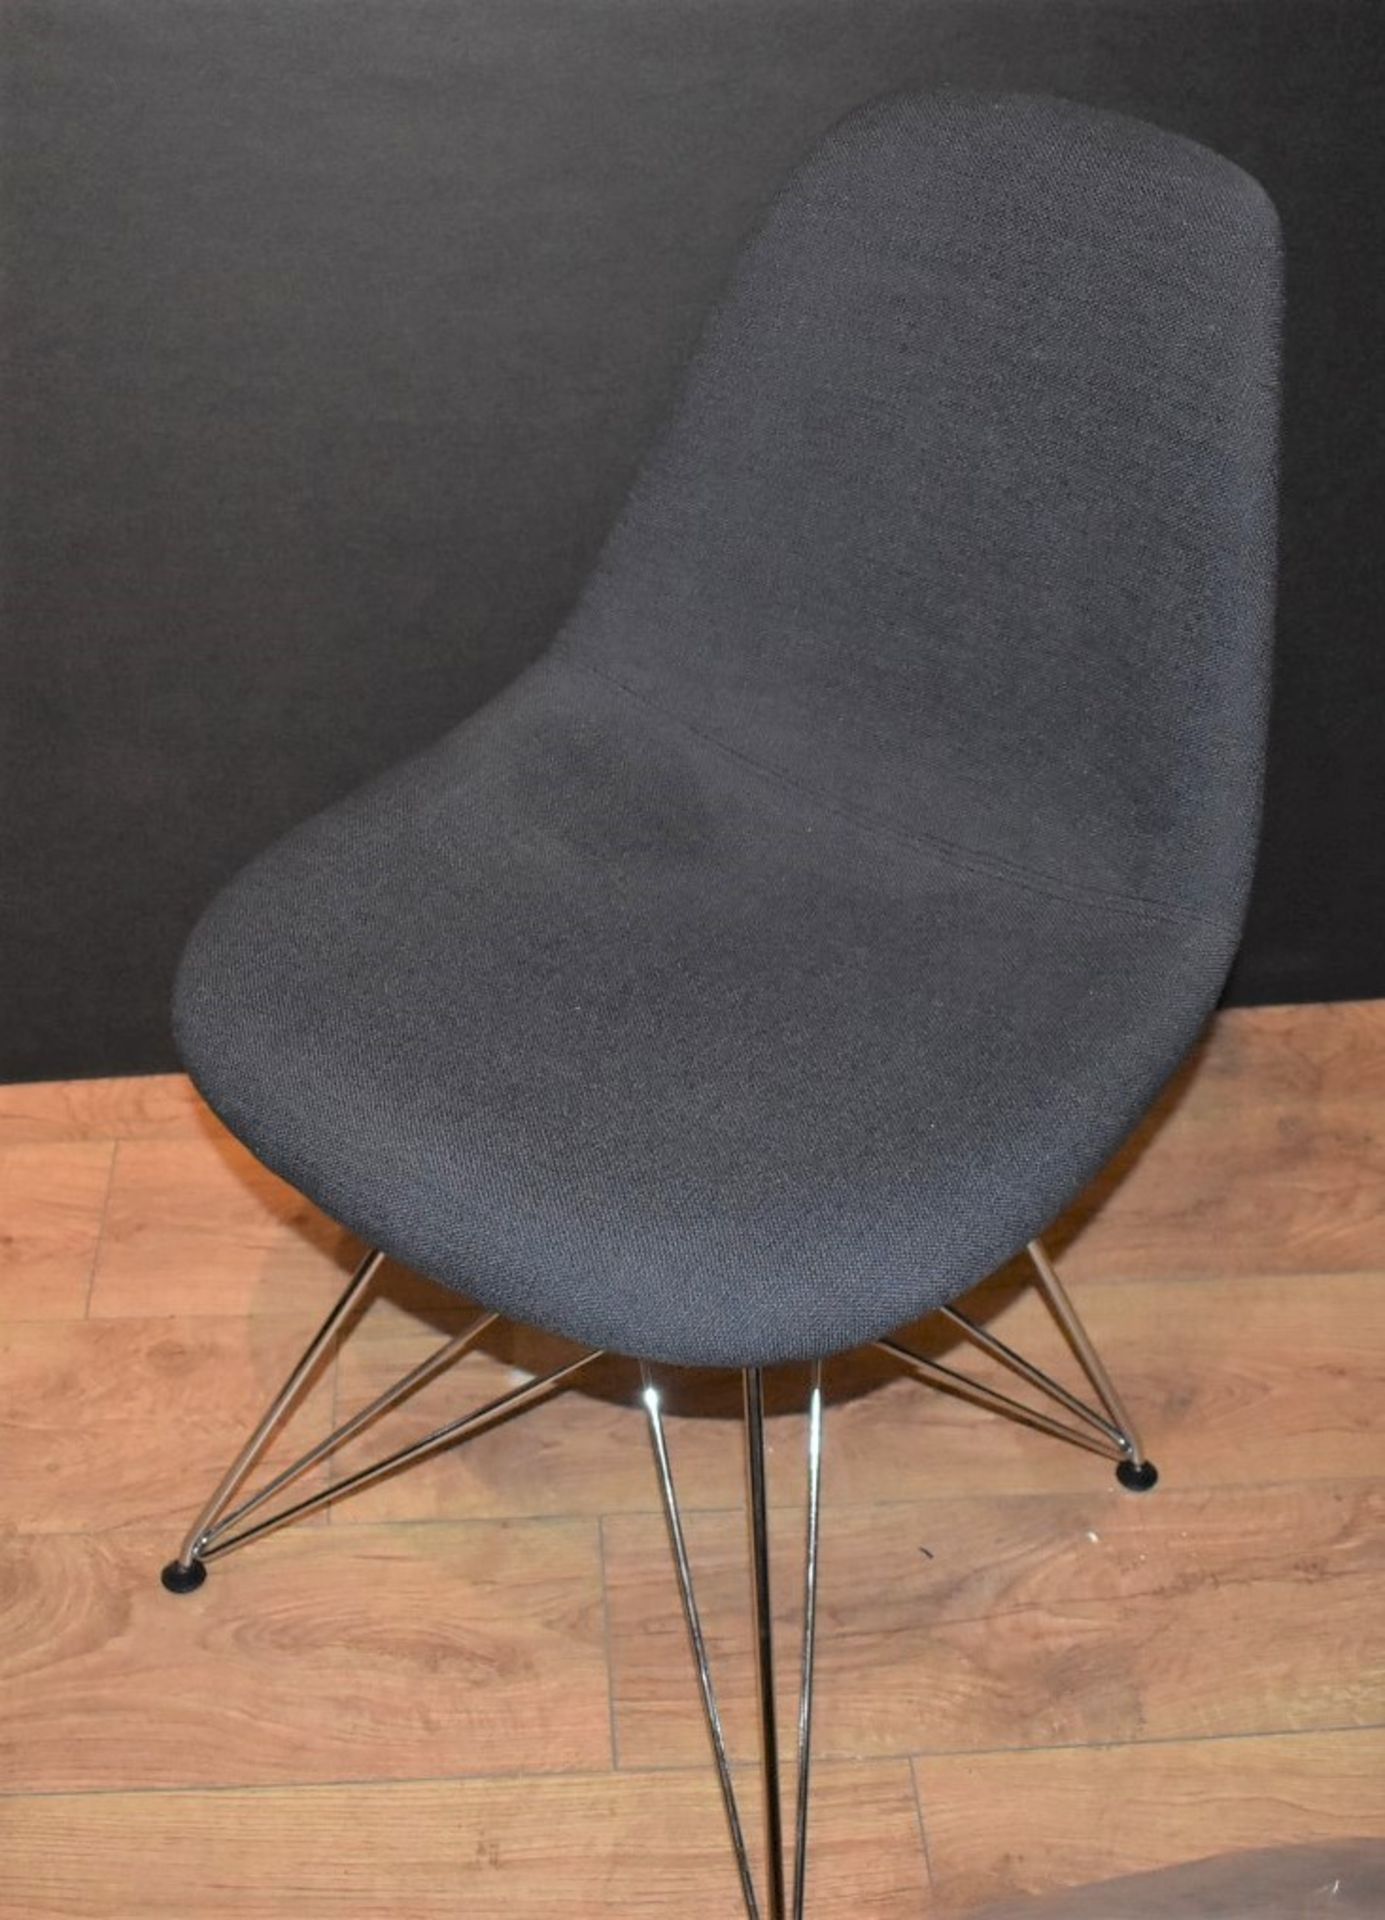 6 x Eames Inspired Eiffel Dining Chairs - Charcoal Fabric Seats With Chrome Bases - New and Unused -